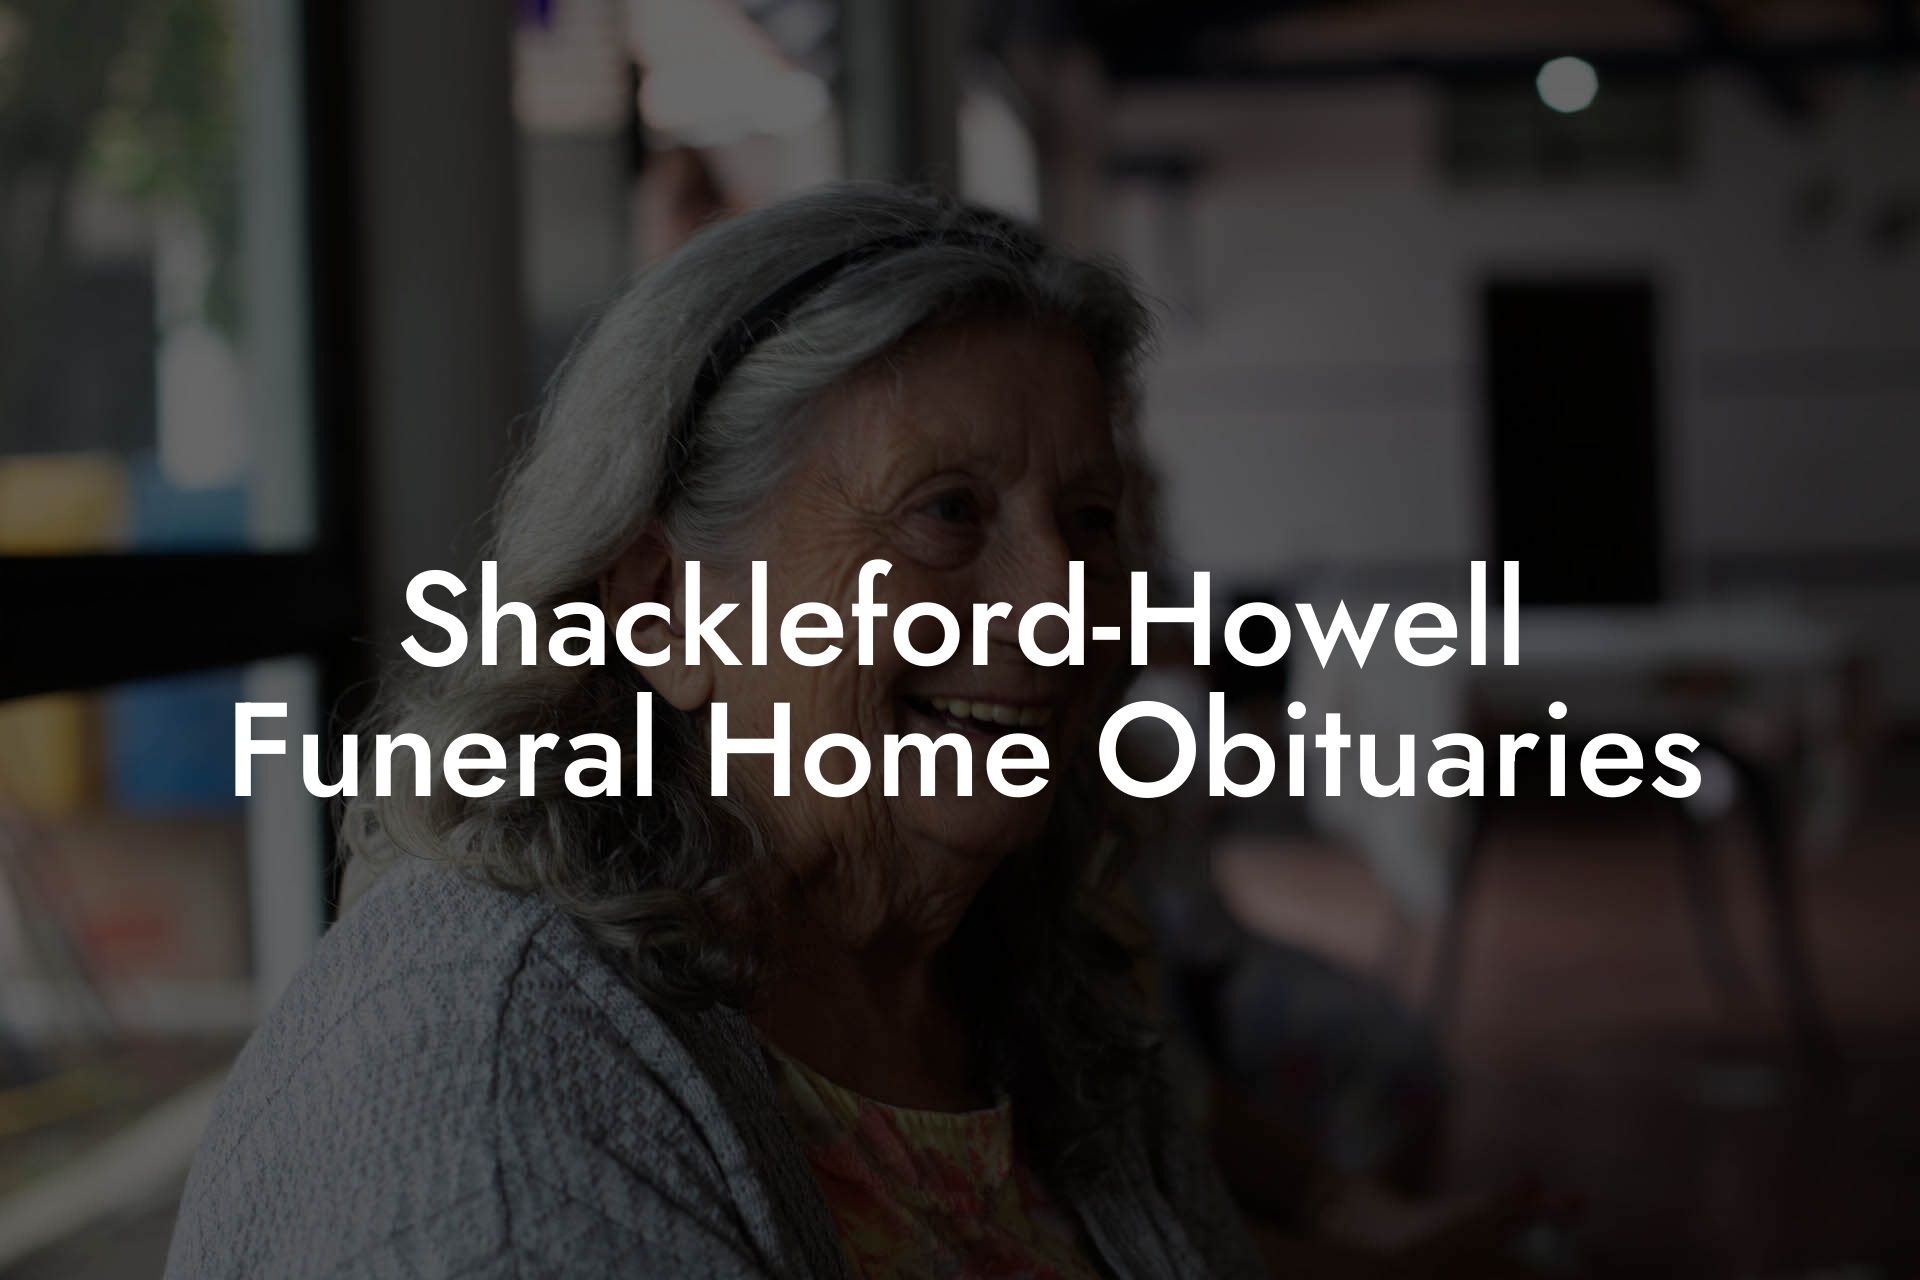 Shackleford-Howell Funeral Home Obituaries